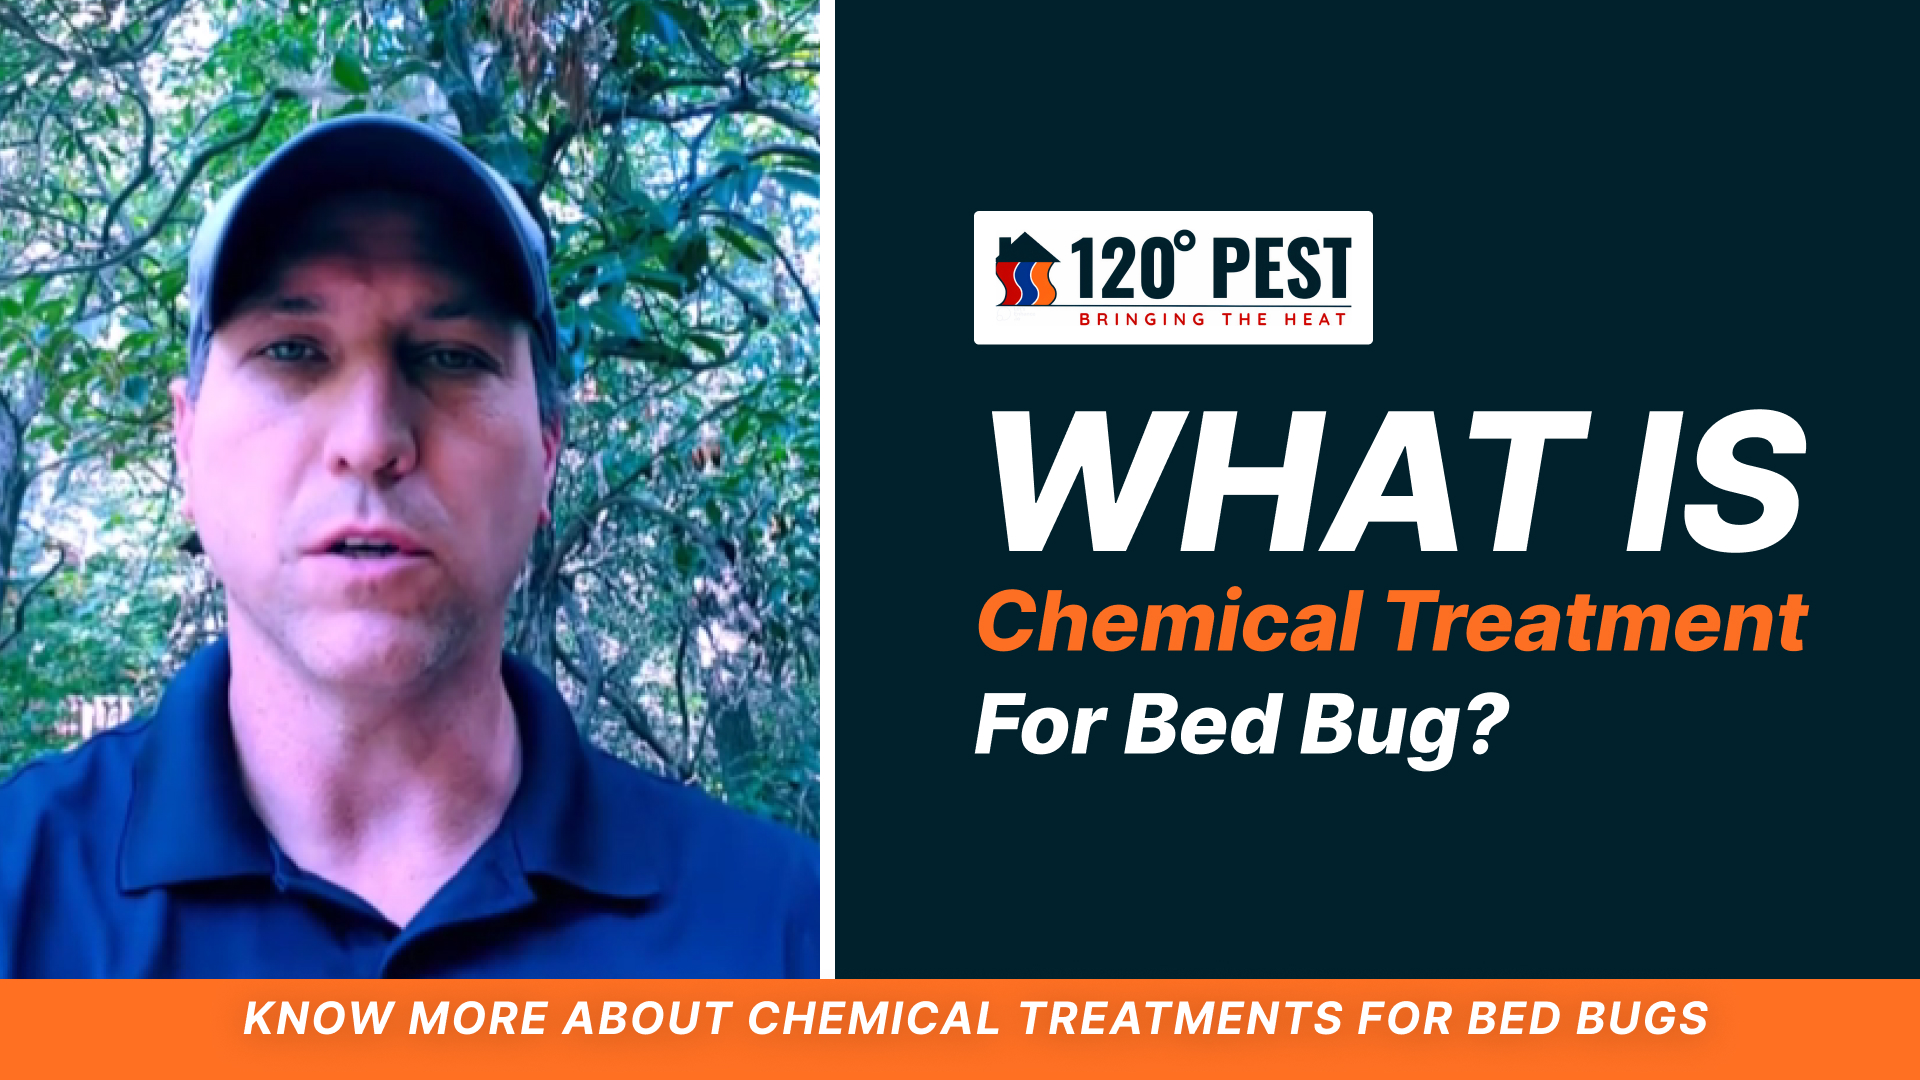 What is chemical treatment for bed bug